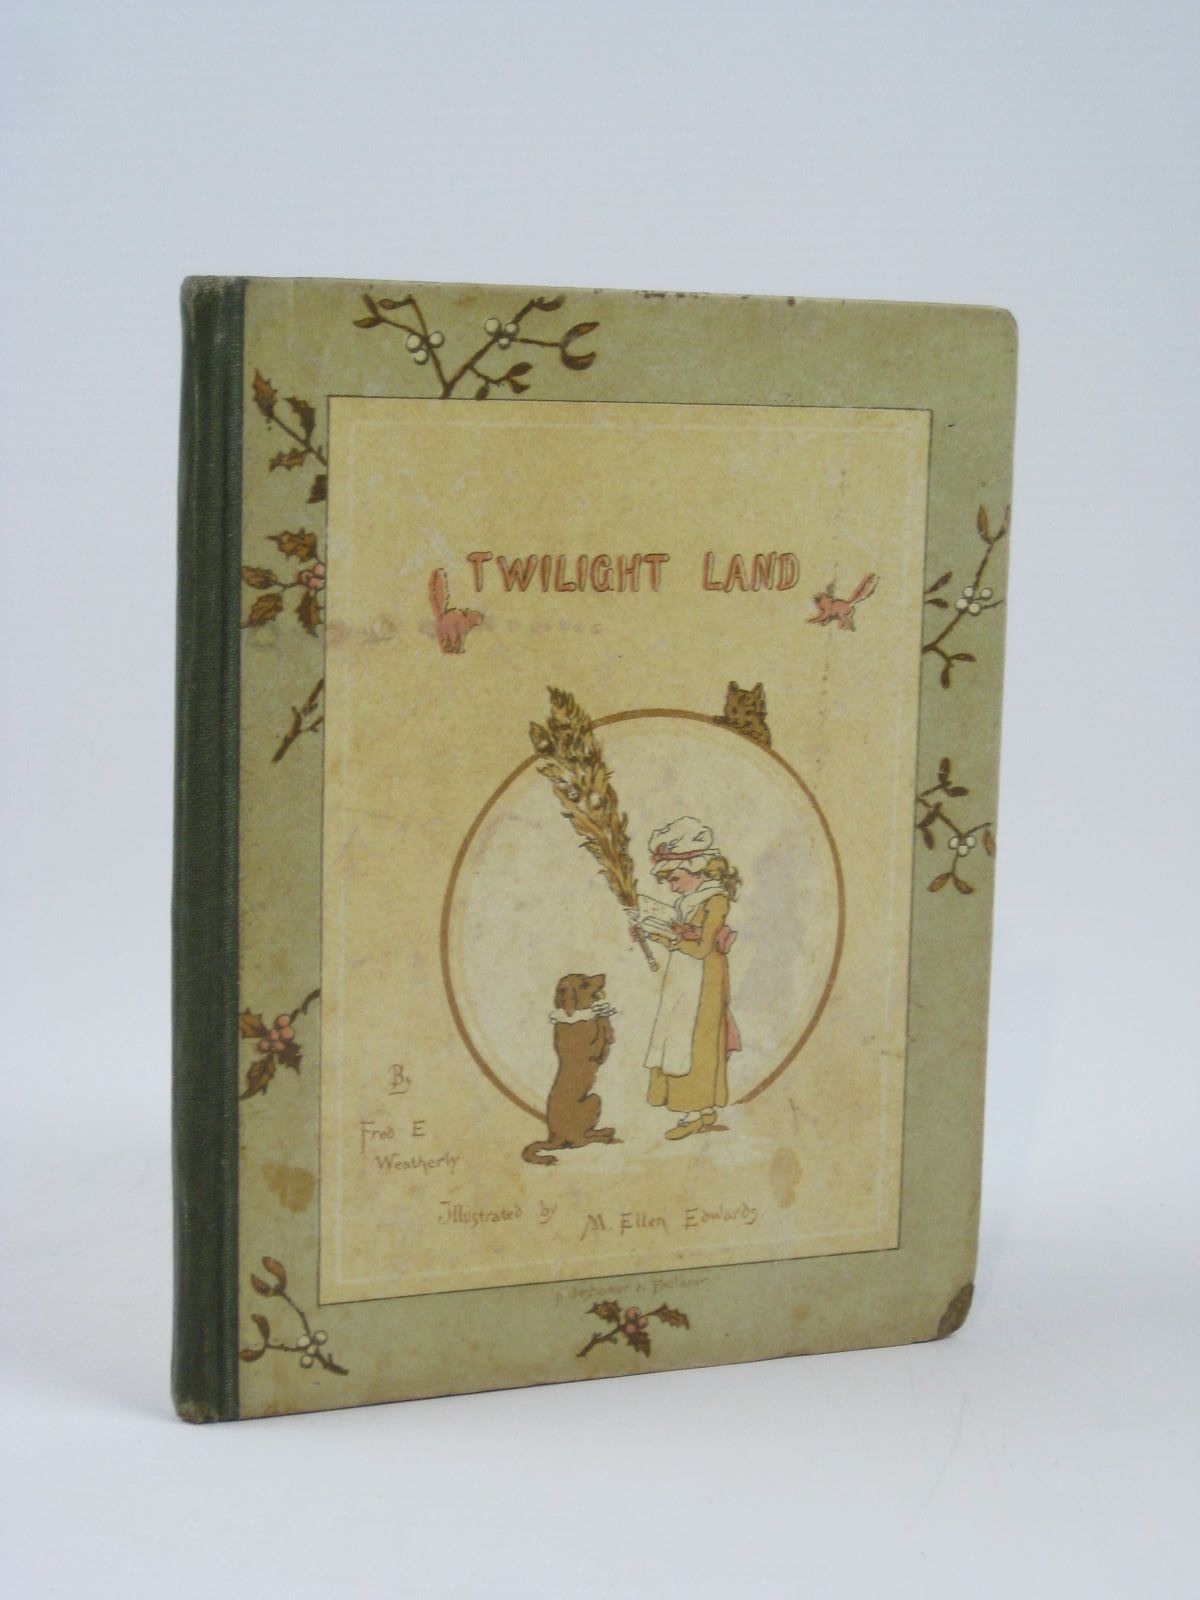 Cover of TWILIGHT LAND by F.E. Weatherly